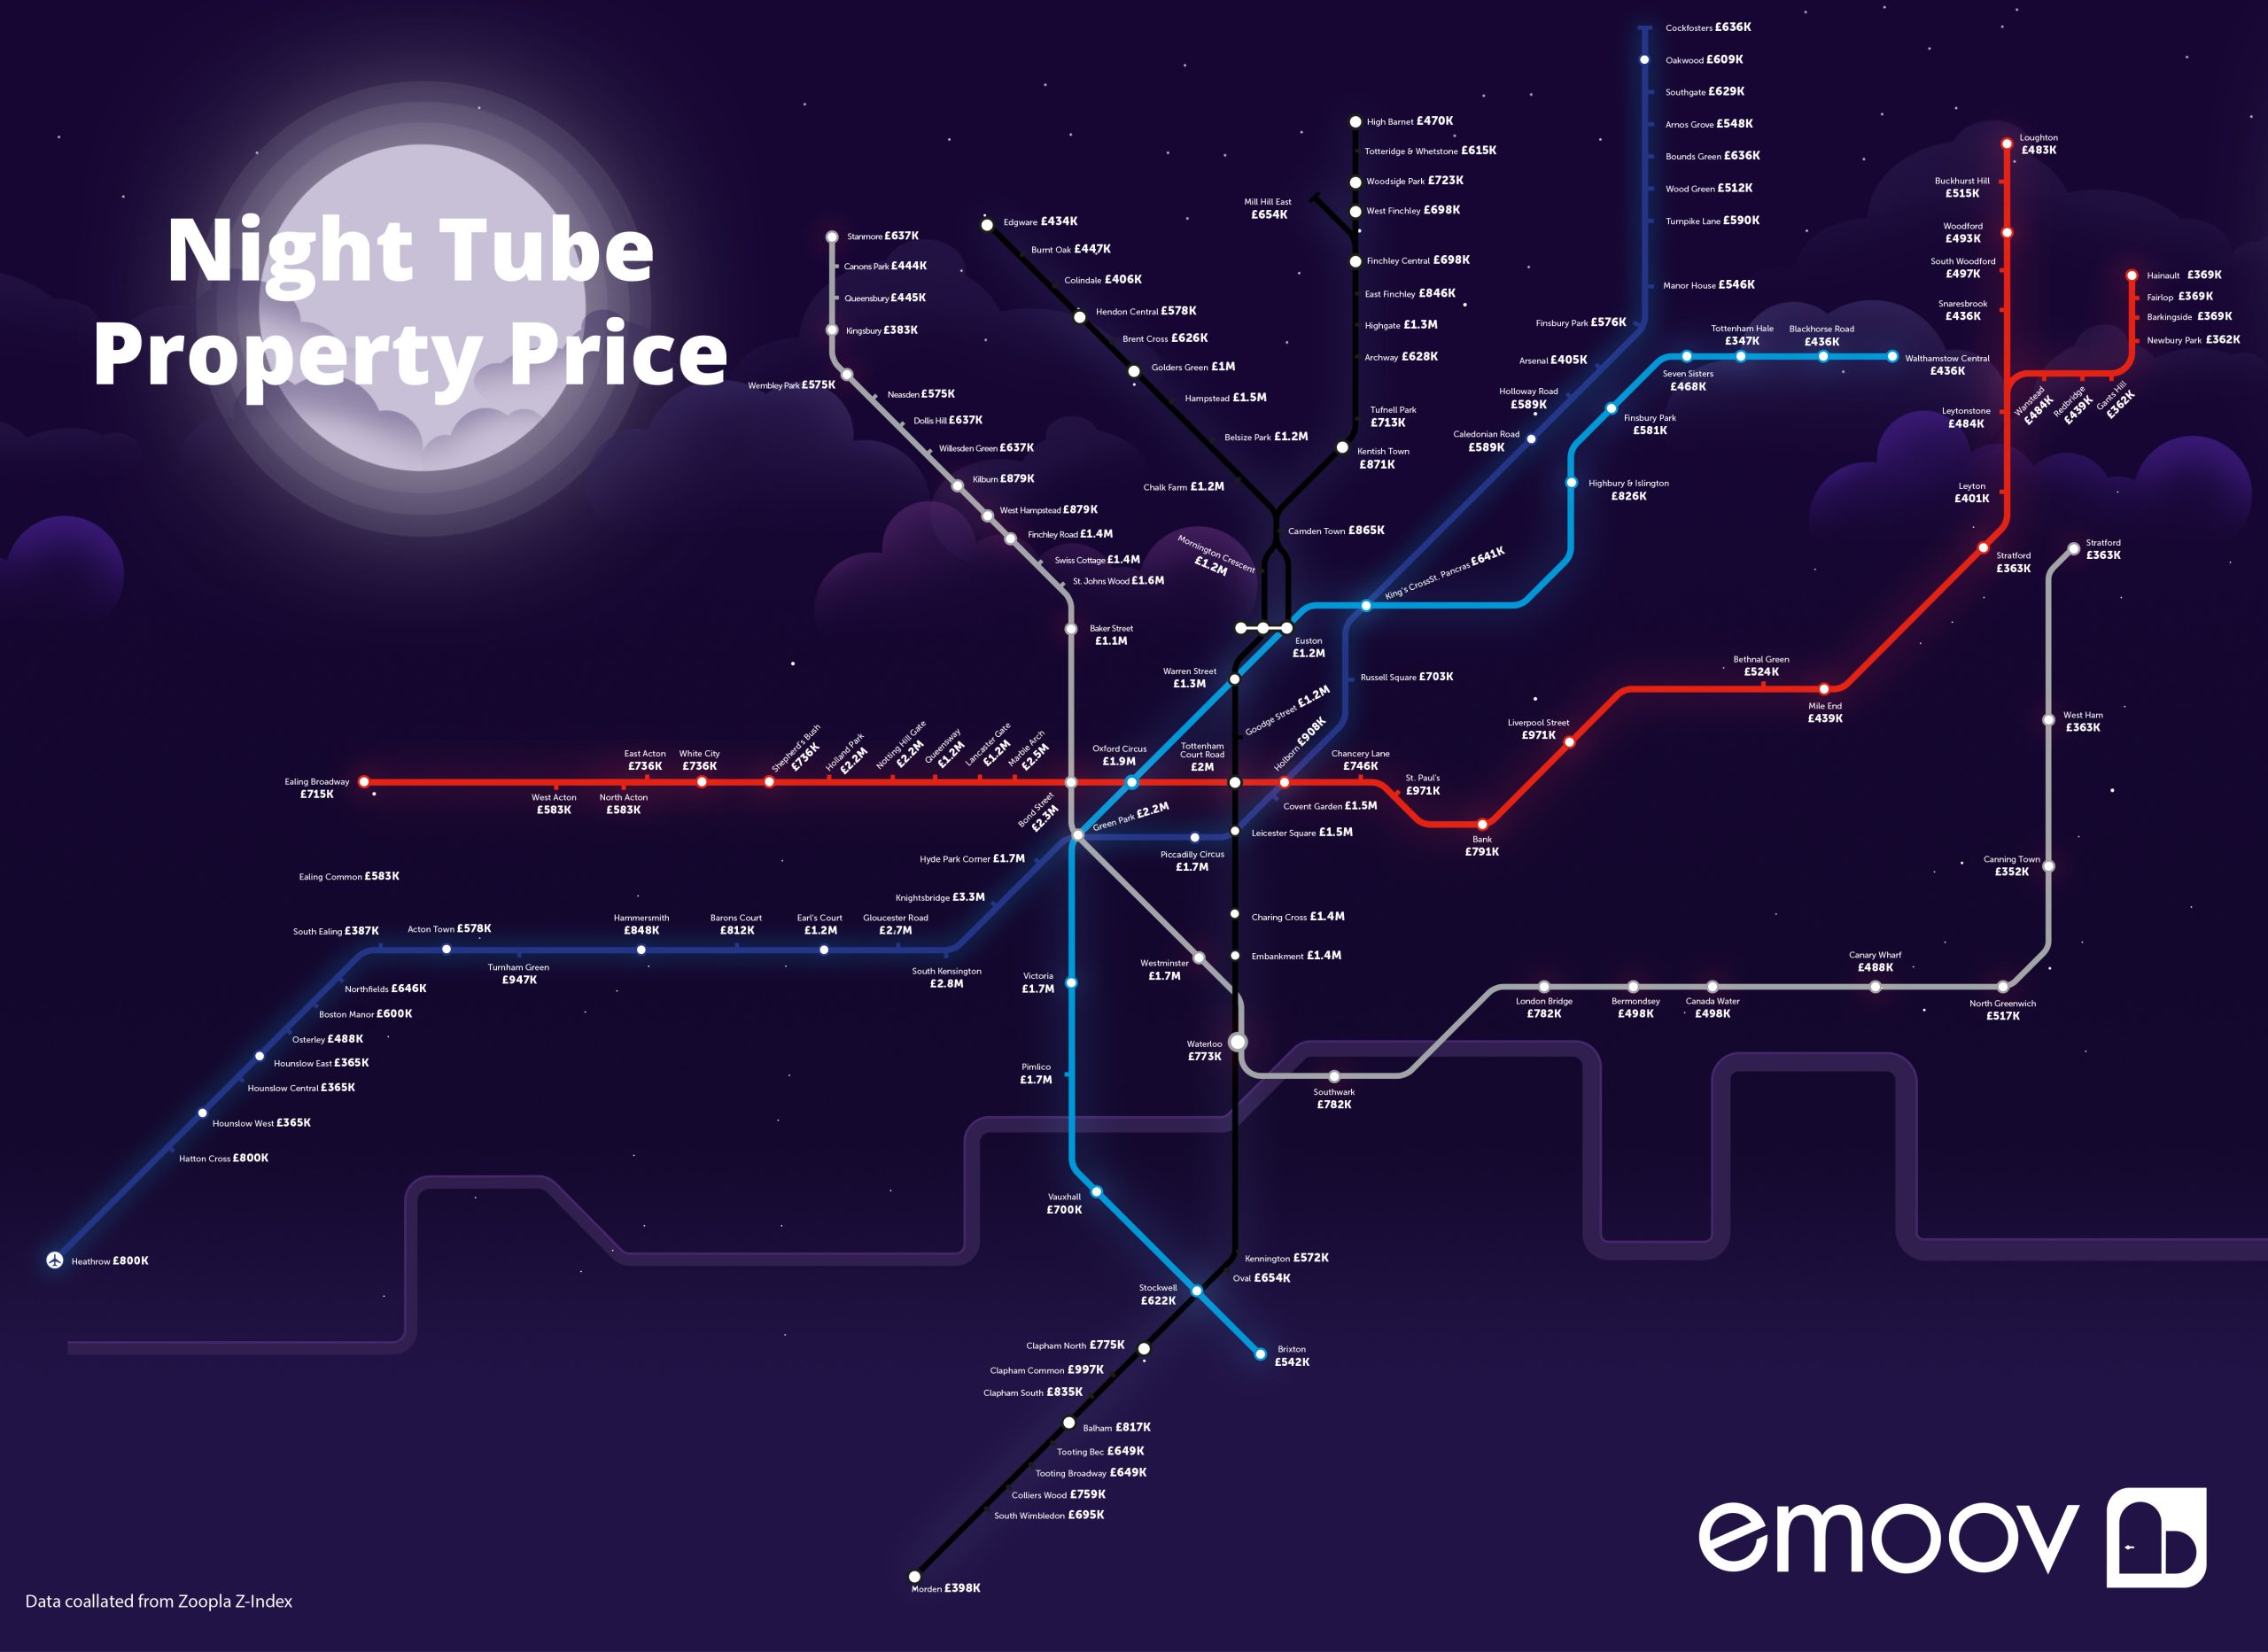 eMoov Examines Property Cost Along the Latest Night Tube Addition